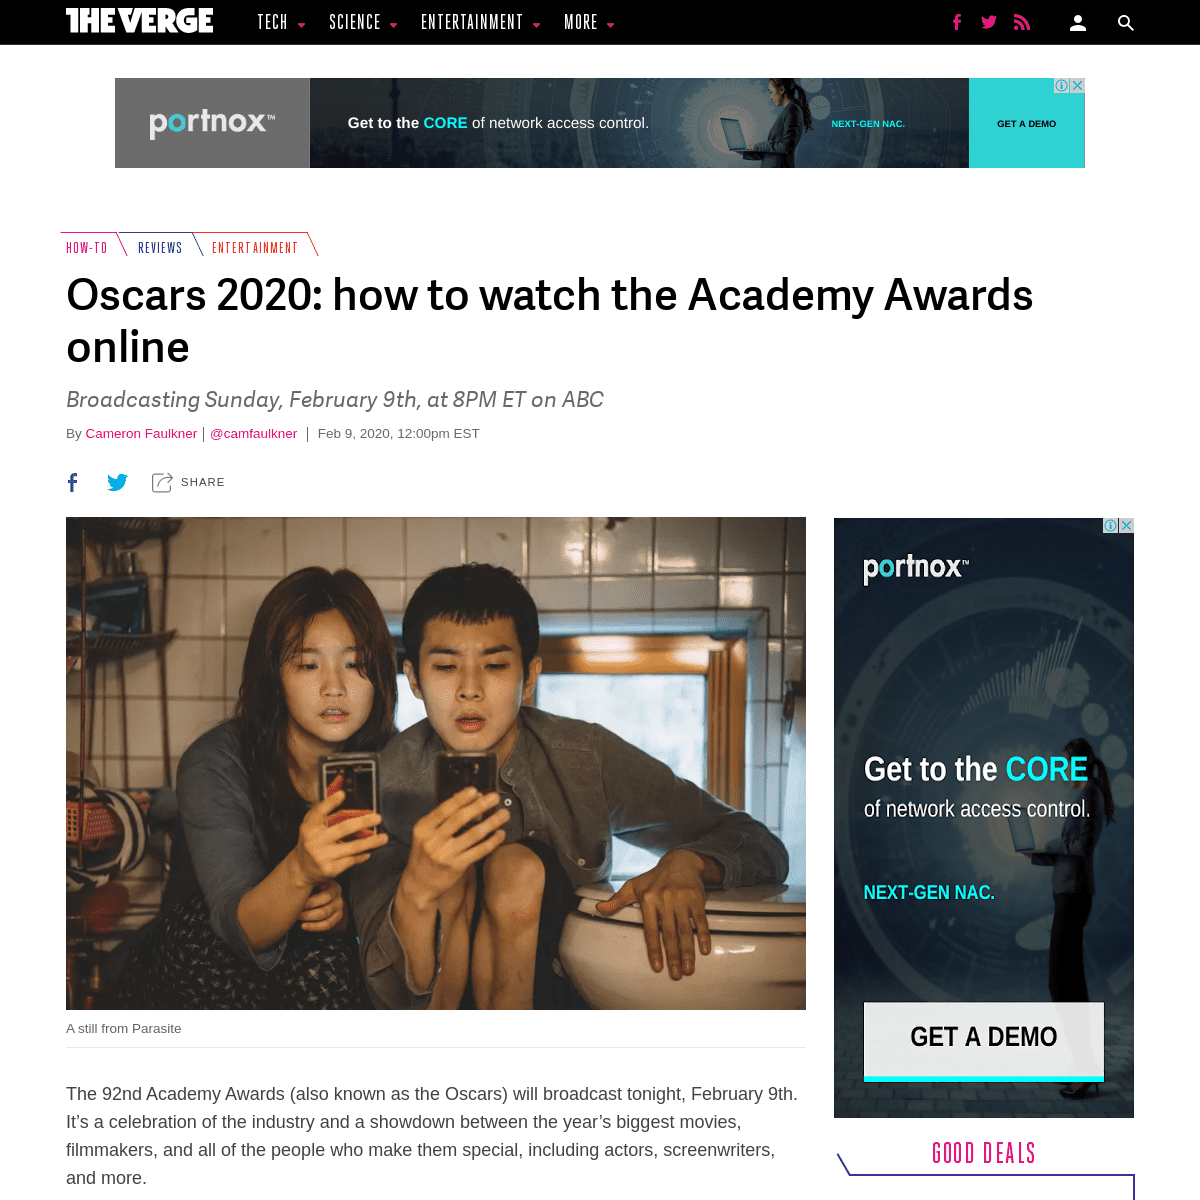 A complete backup of www.theverge.com/2020/2/9/21123015/oscars-2020-live-stream-watch-how-to-online-academy-awards-start-time